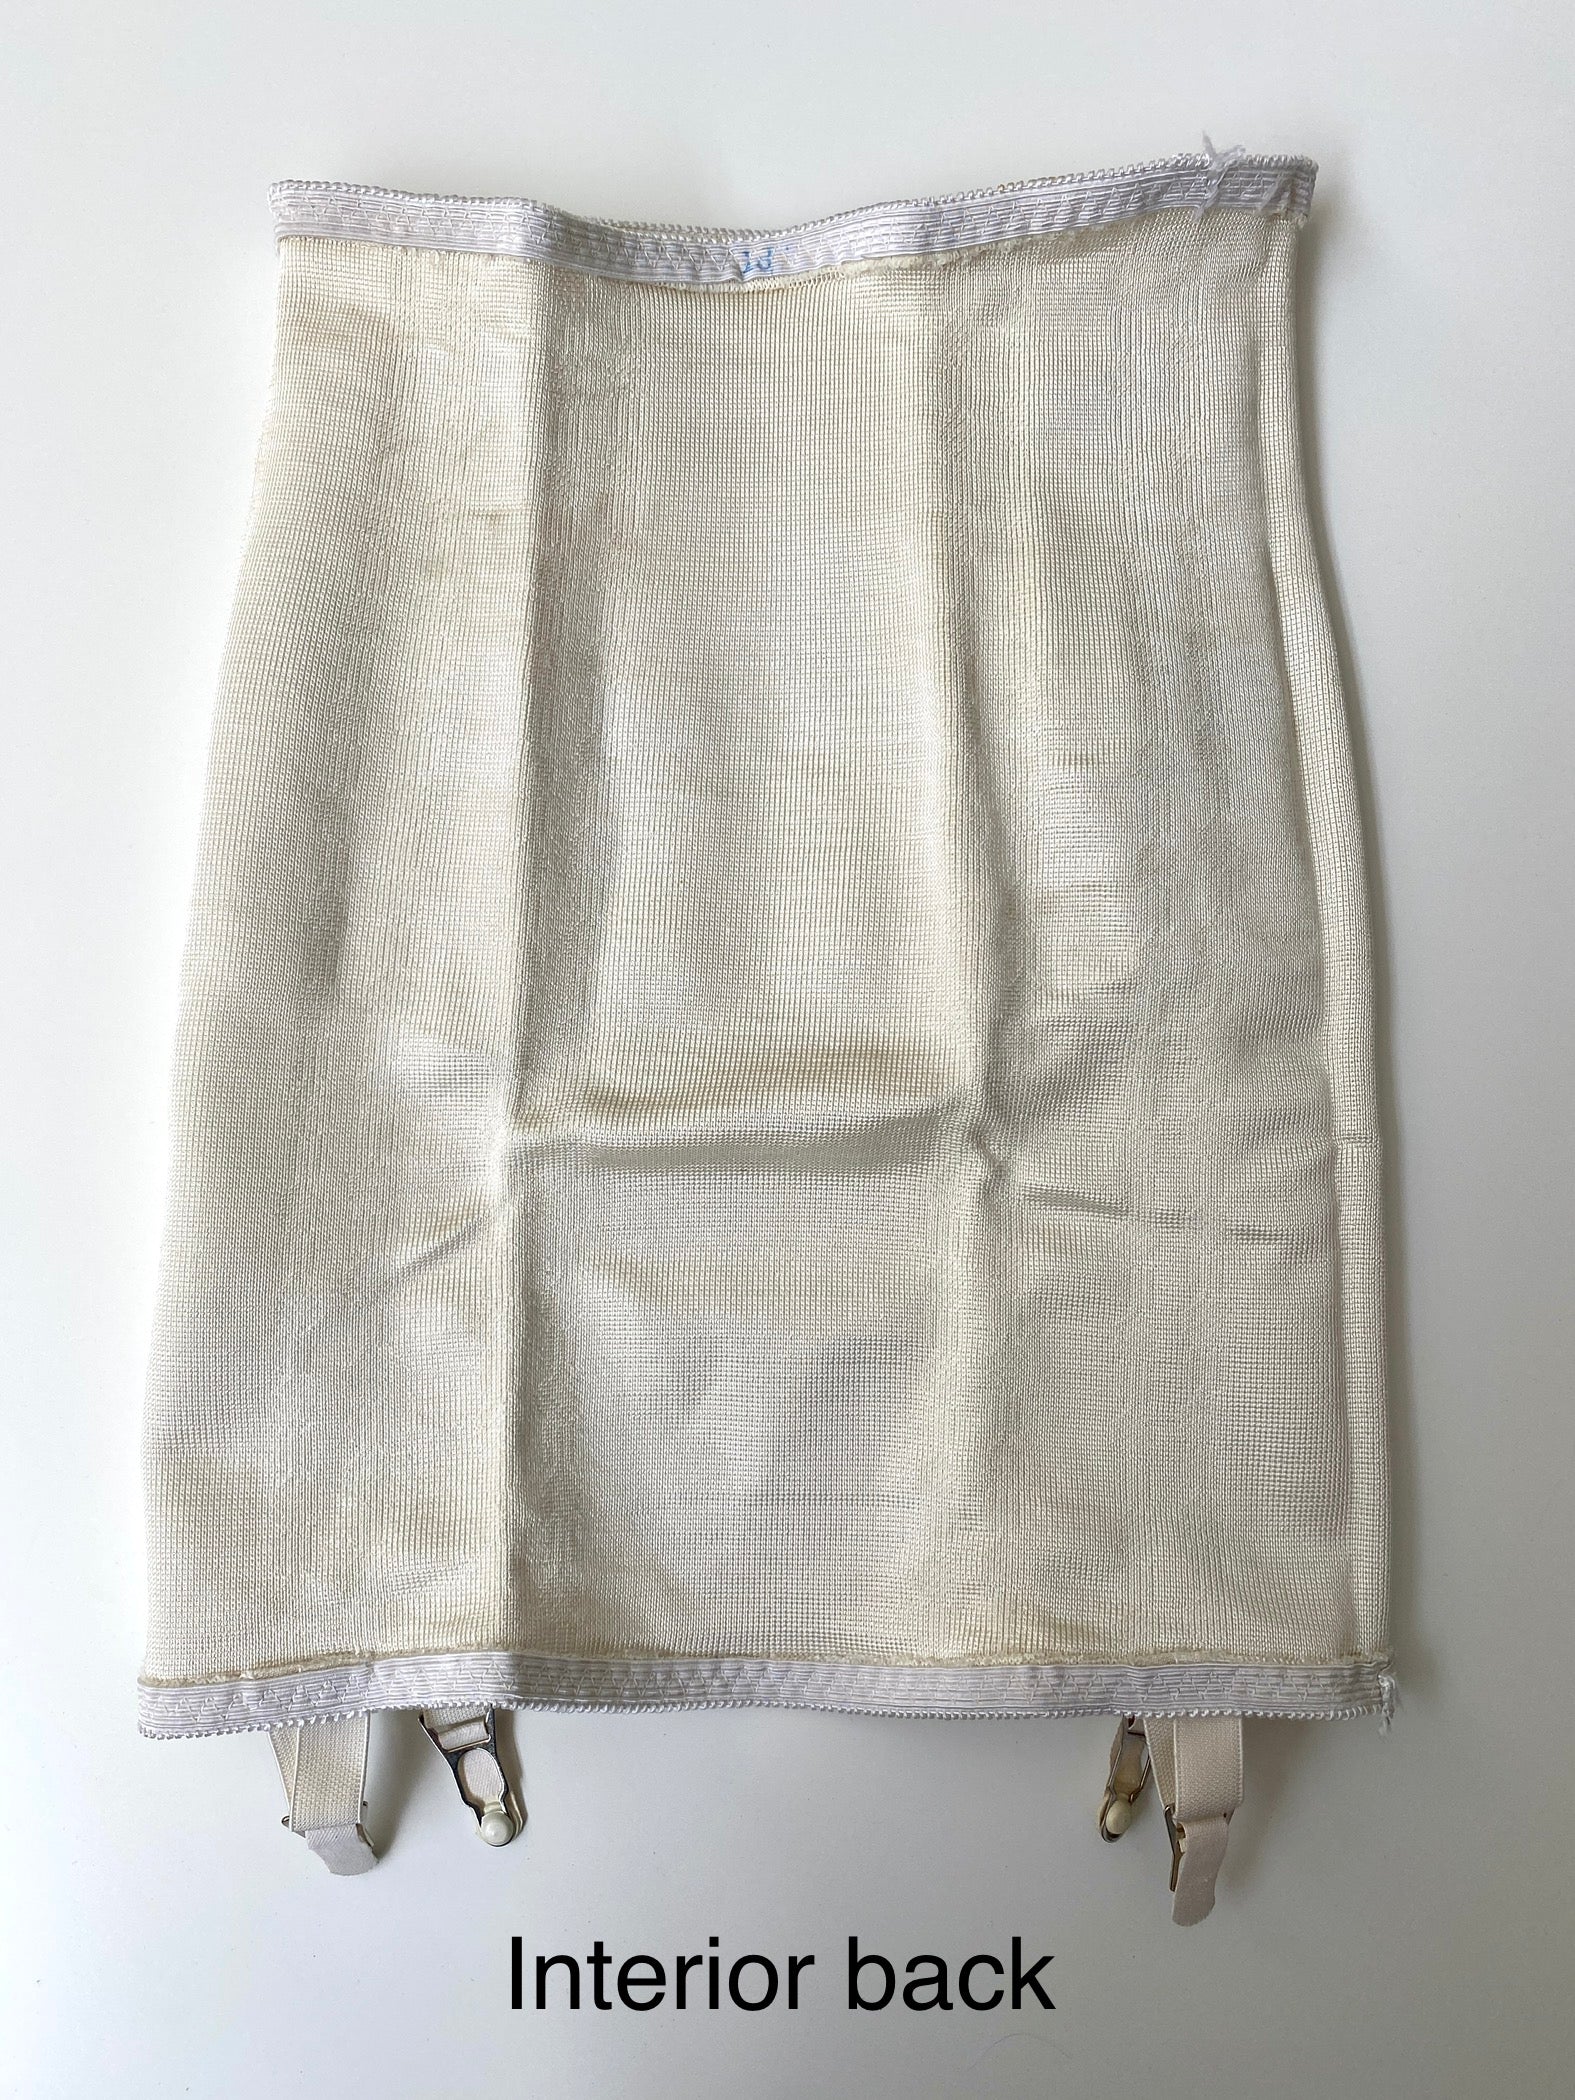 Vintage 1950's-60's ADOLA Brand Cream Ivory Girdle With Garters Size M -  clothing & accessories - by owner - apparel